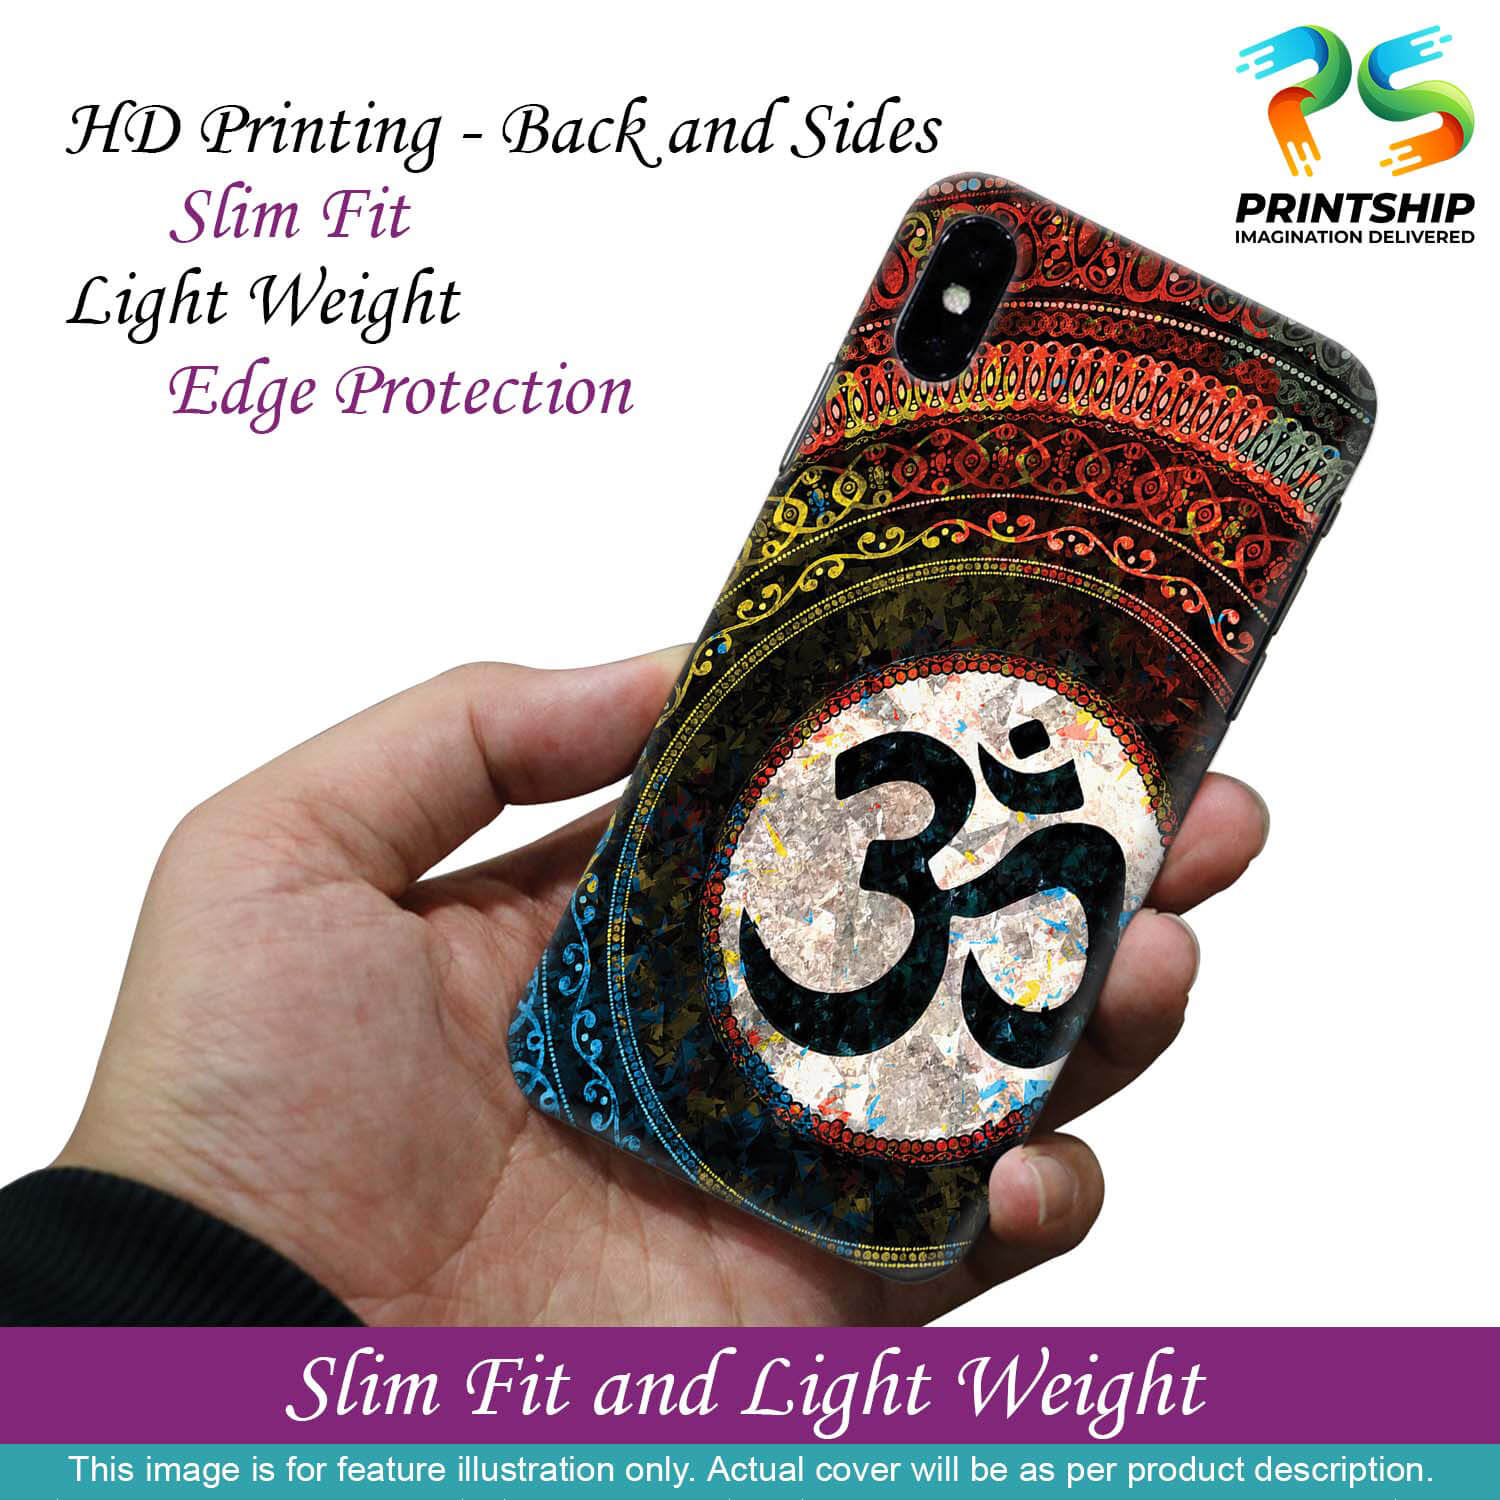 PS1311-Om Yoga Back Cover for Apple iPhone 7 Plus